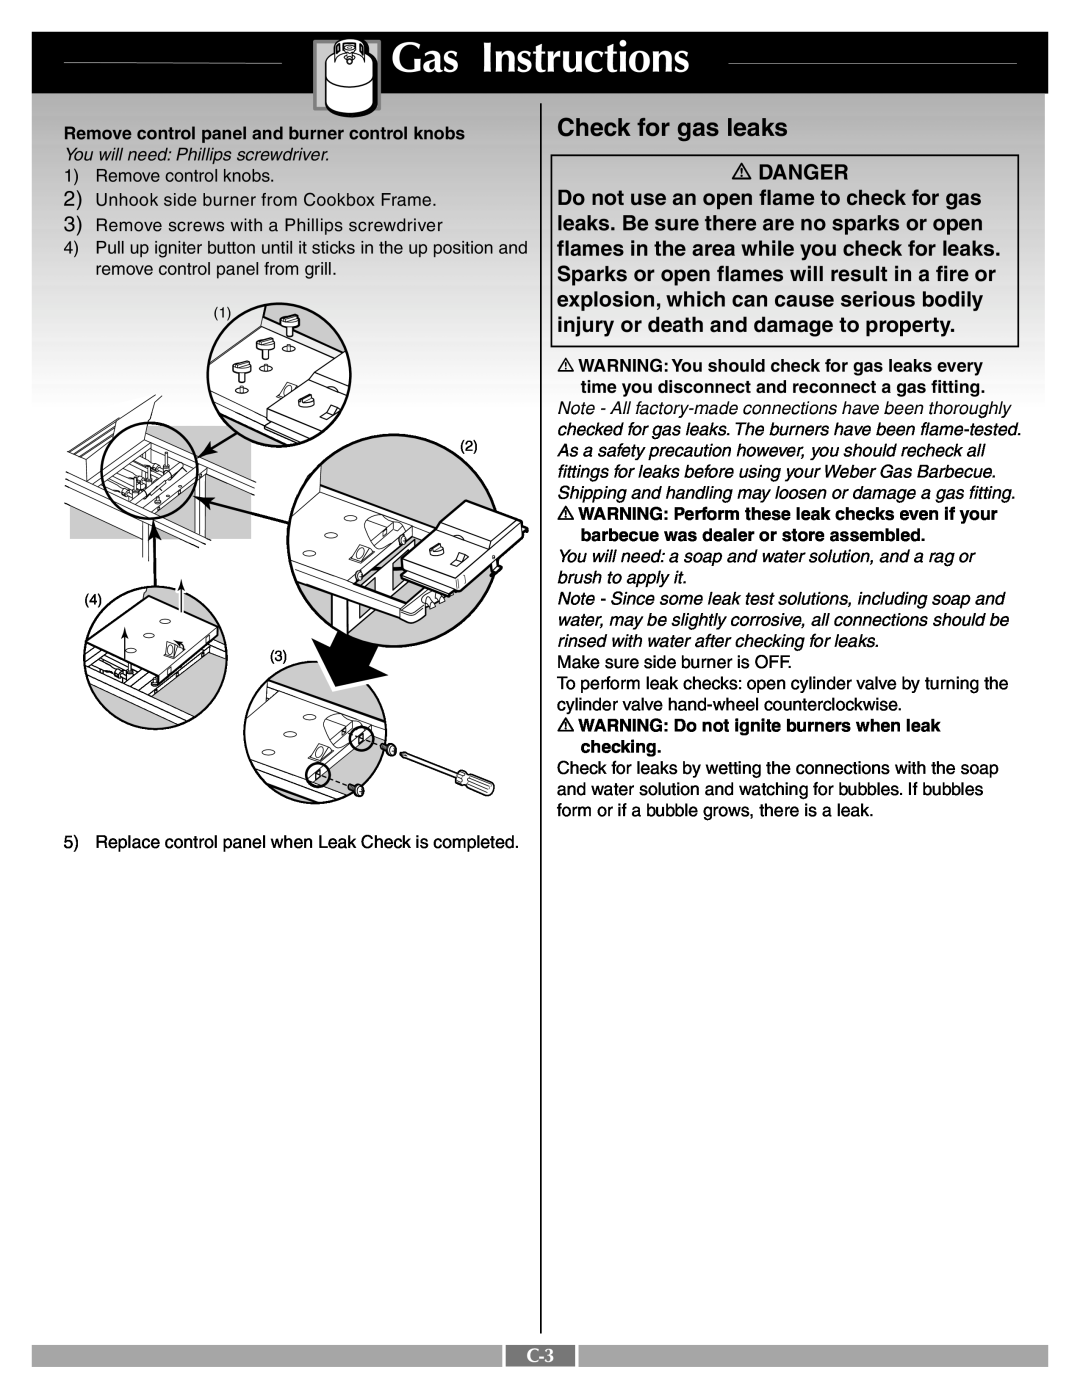 Weber 55249 Gas Instructions, Check for gas leaks, Danger, Do not use an open flame to check for gas, Remove control knobs 